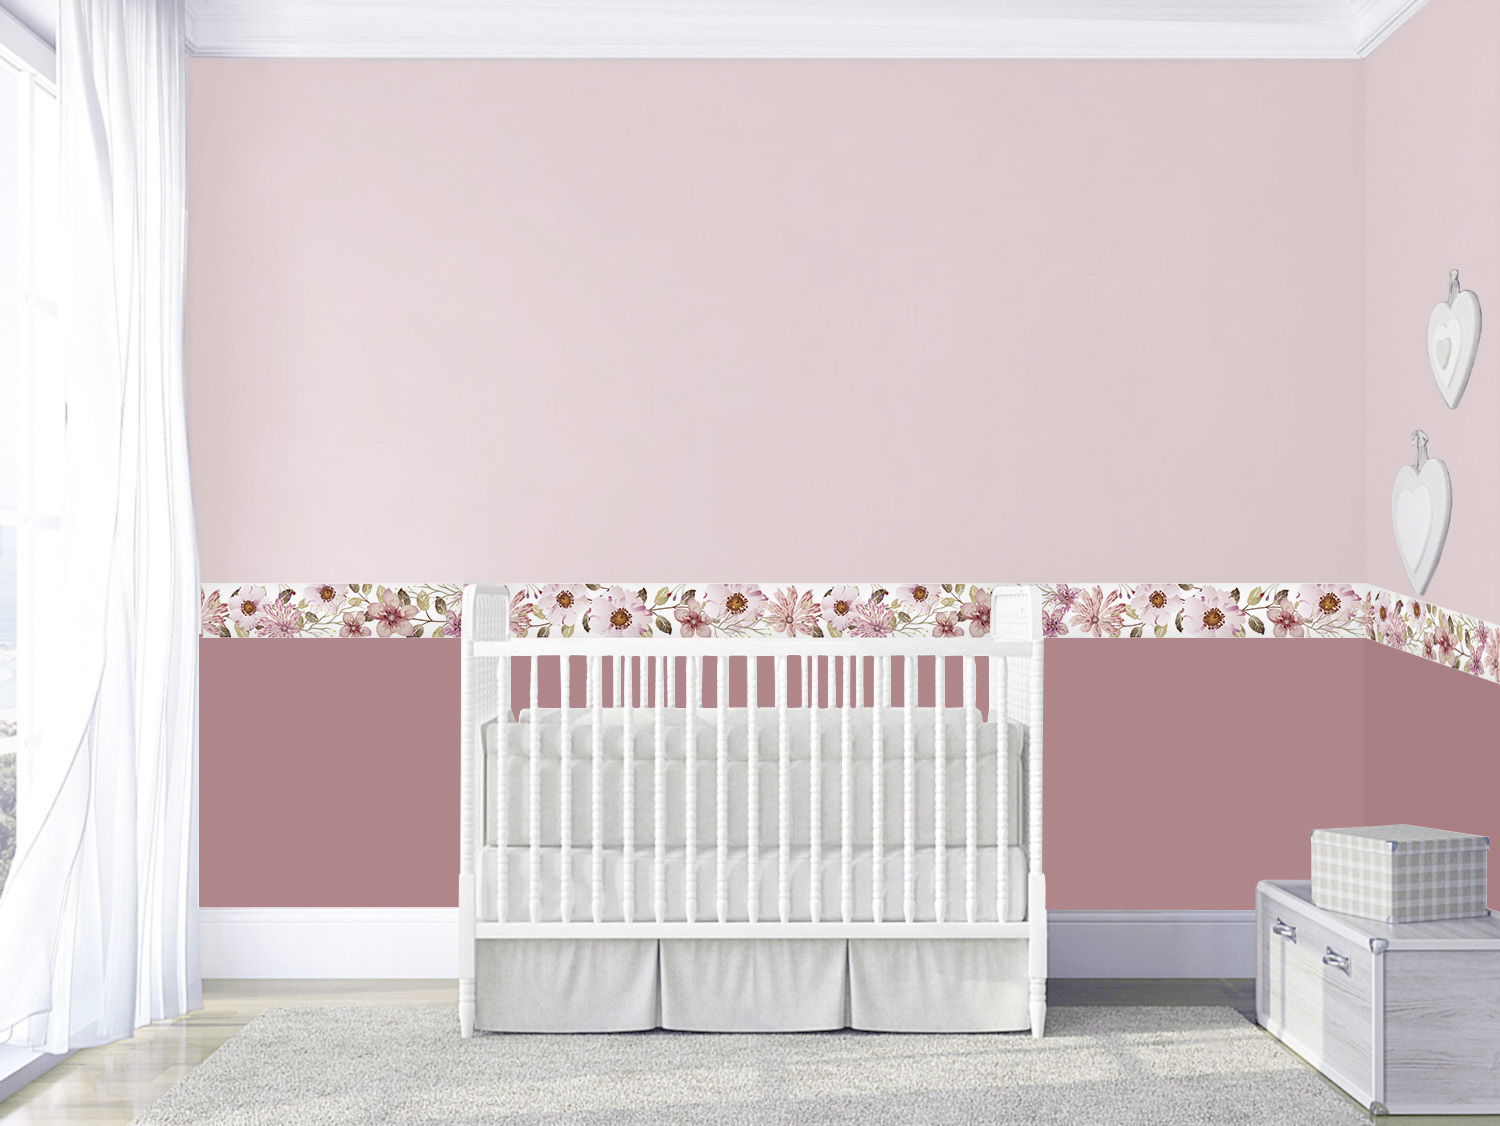 Wall Stickers Pink Flowers Wall Stickers Pink Flowers